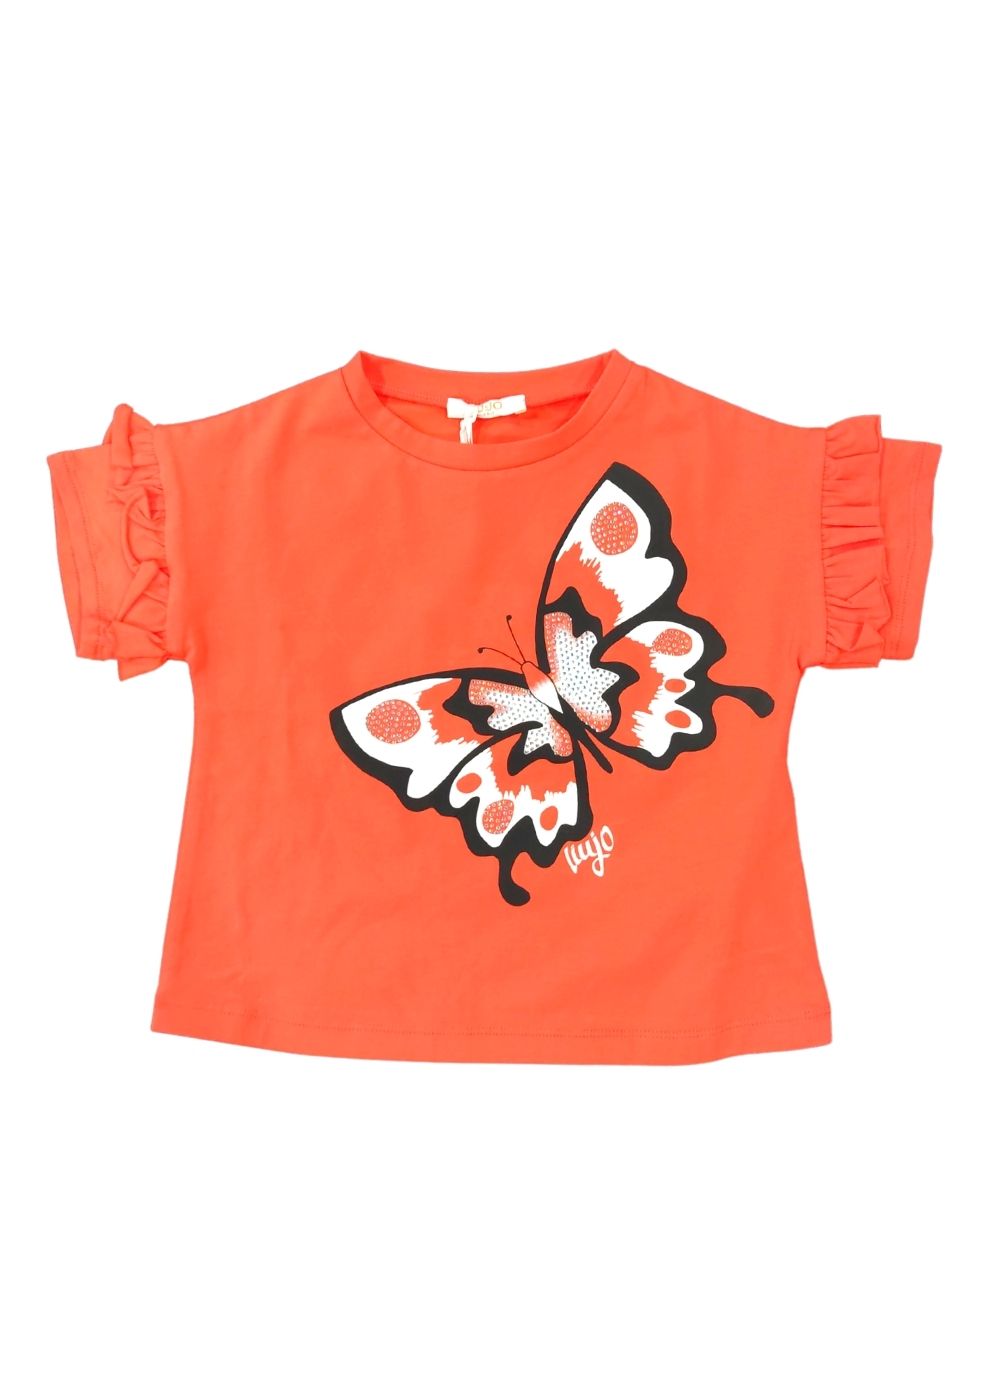 Featured image for “Liu Jo T-shirt Butterfly”